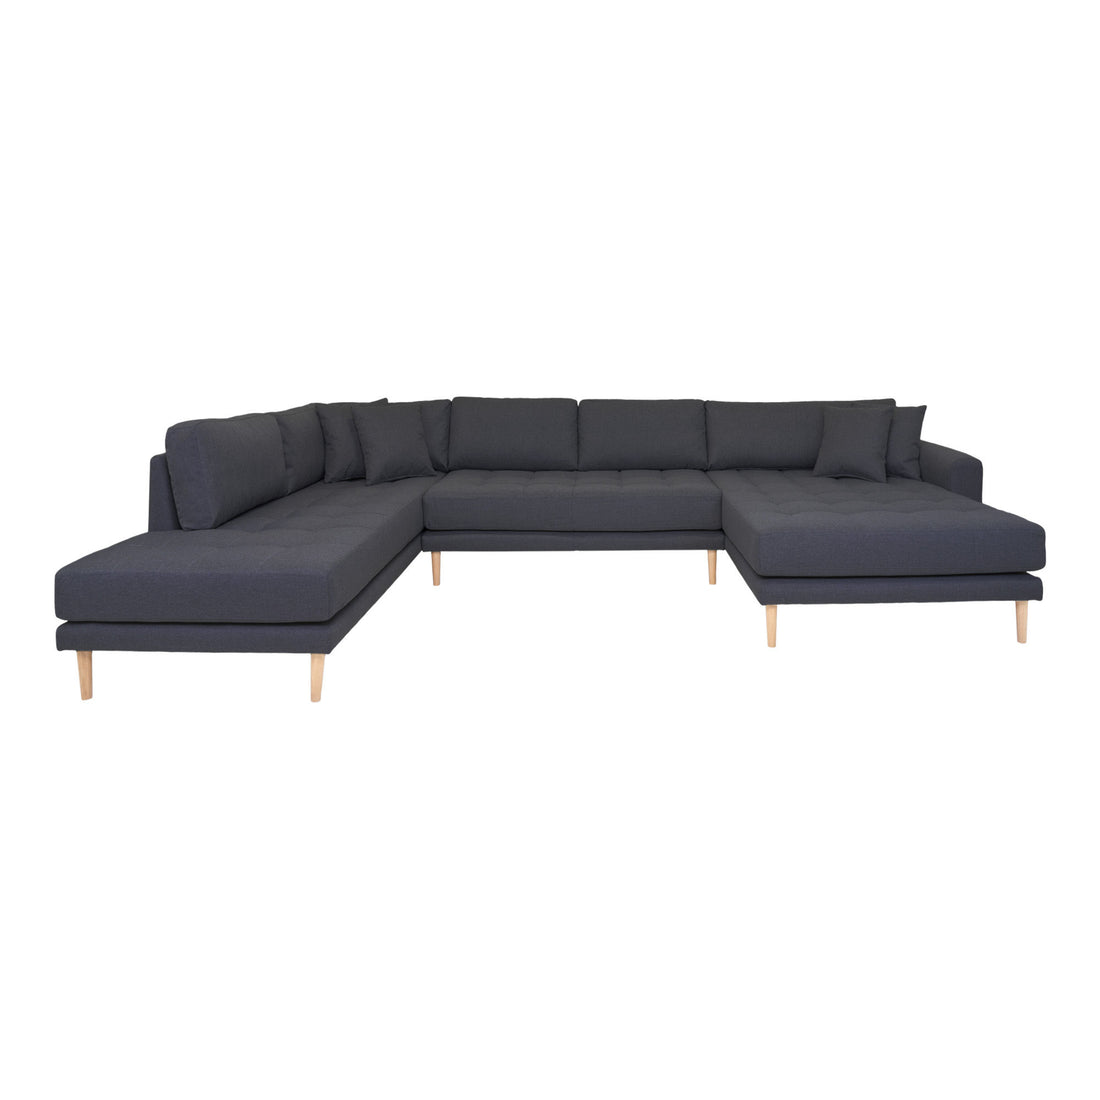 Lido U -sofa Open end - U -sofa open end, right -wing in dark gray with four pillows and nature wooden legs, HN1002 - 1 - pcs